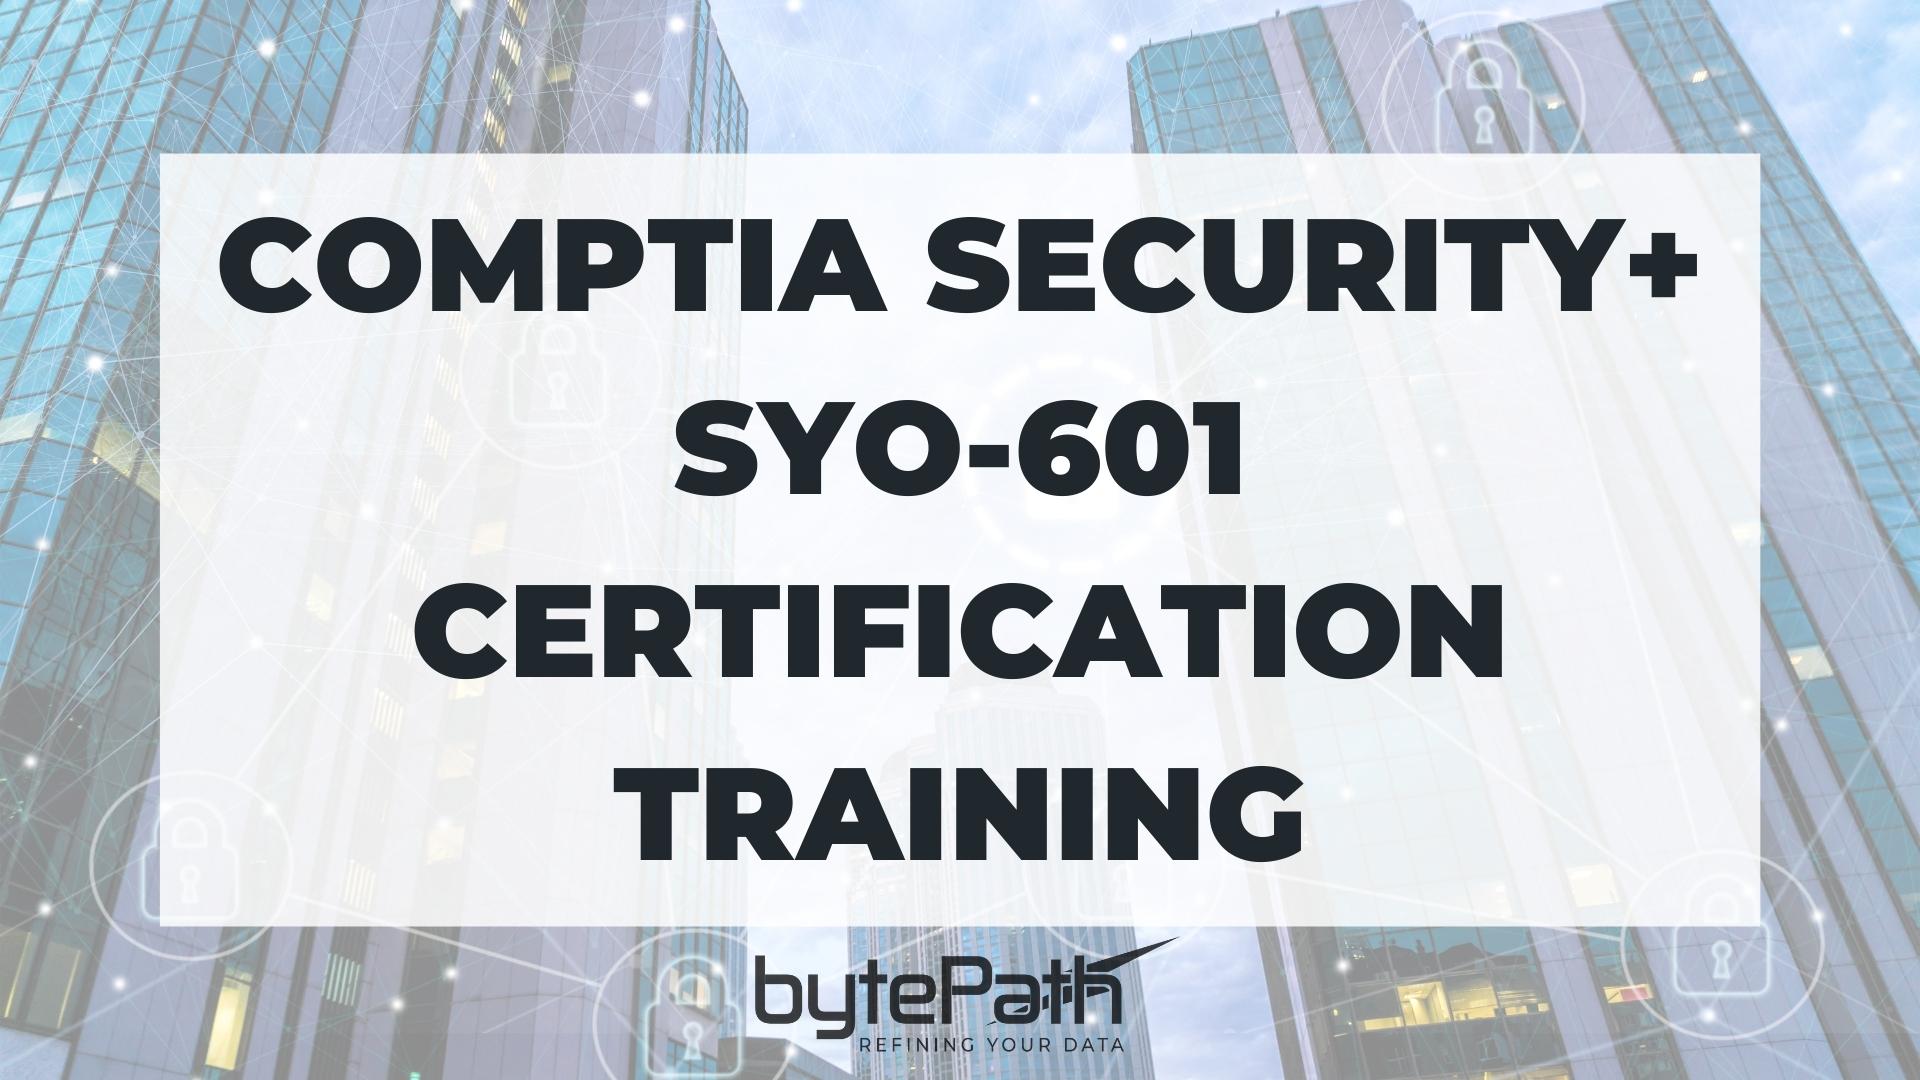 CompTIA Security+ SYO-601 Certification Training